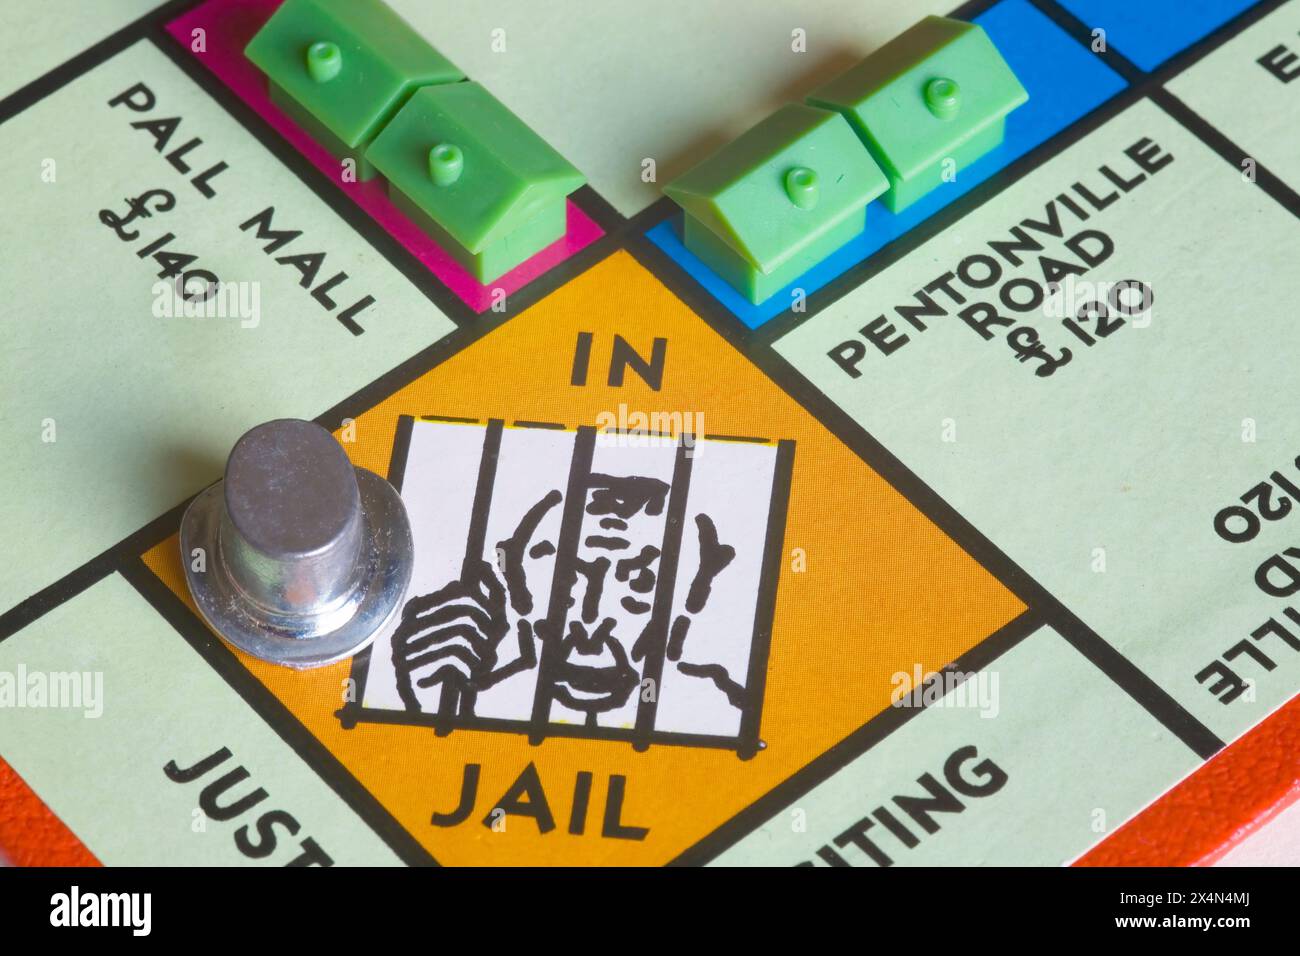 in jail on the monopoly board game Stock Photo